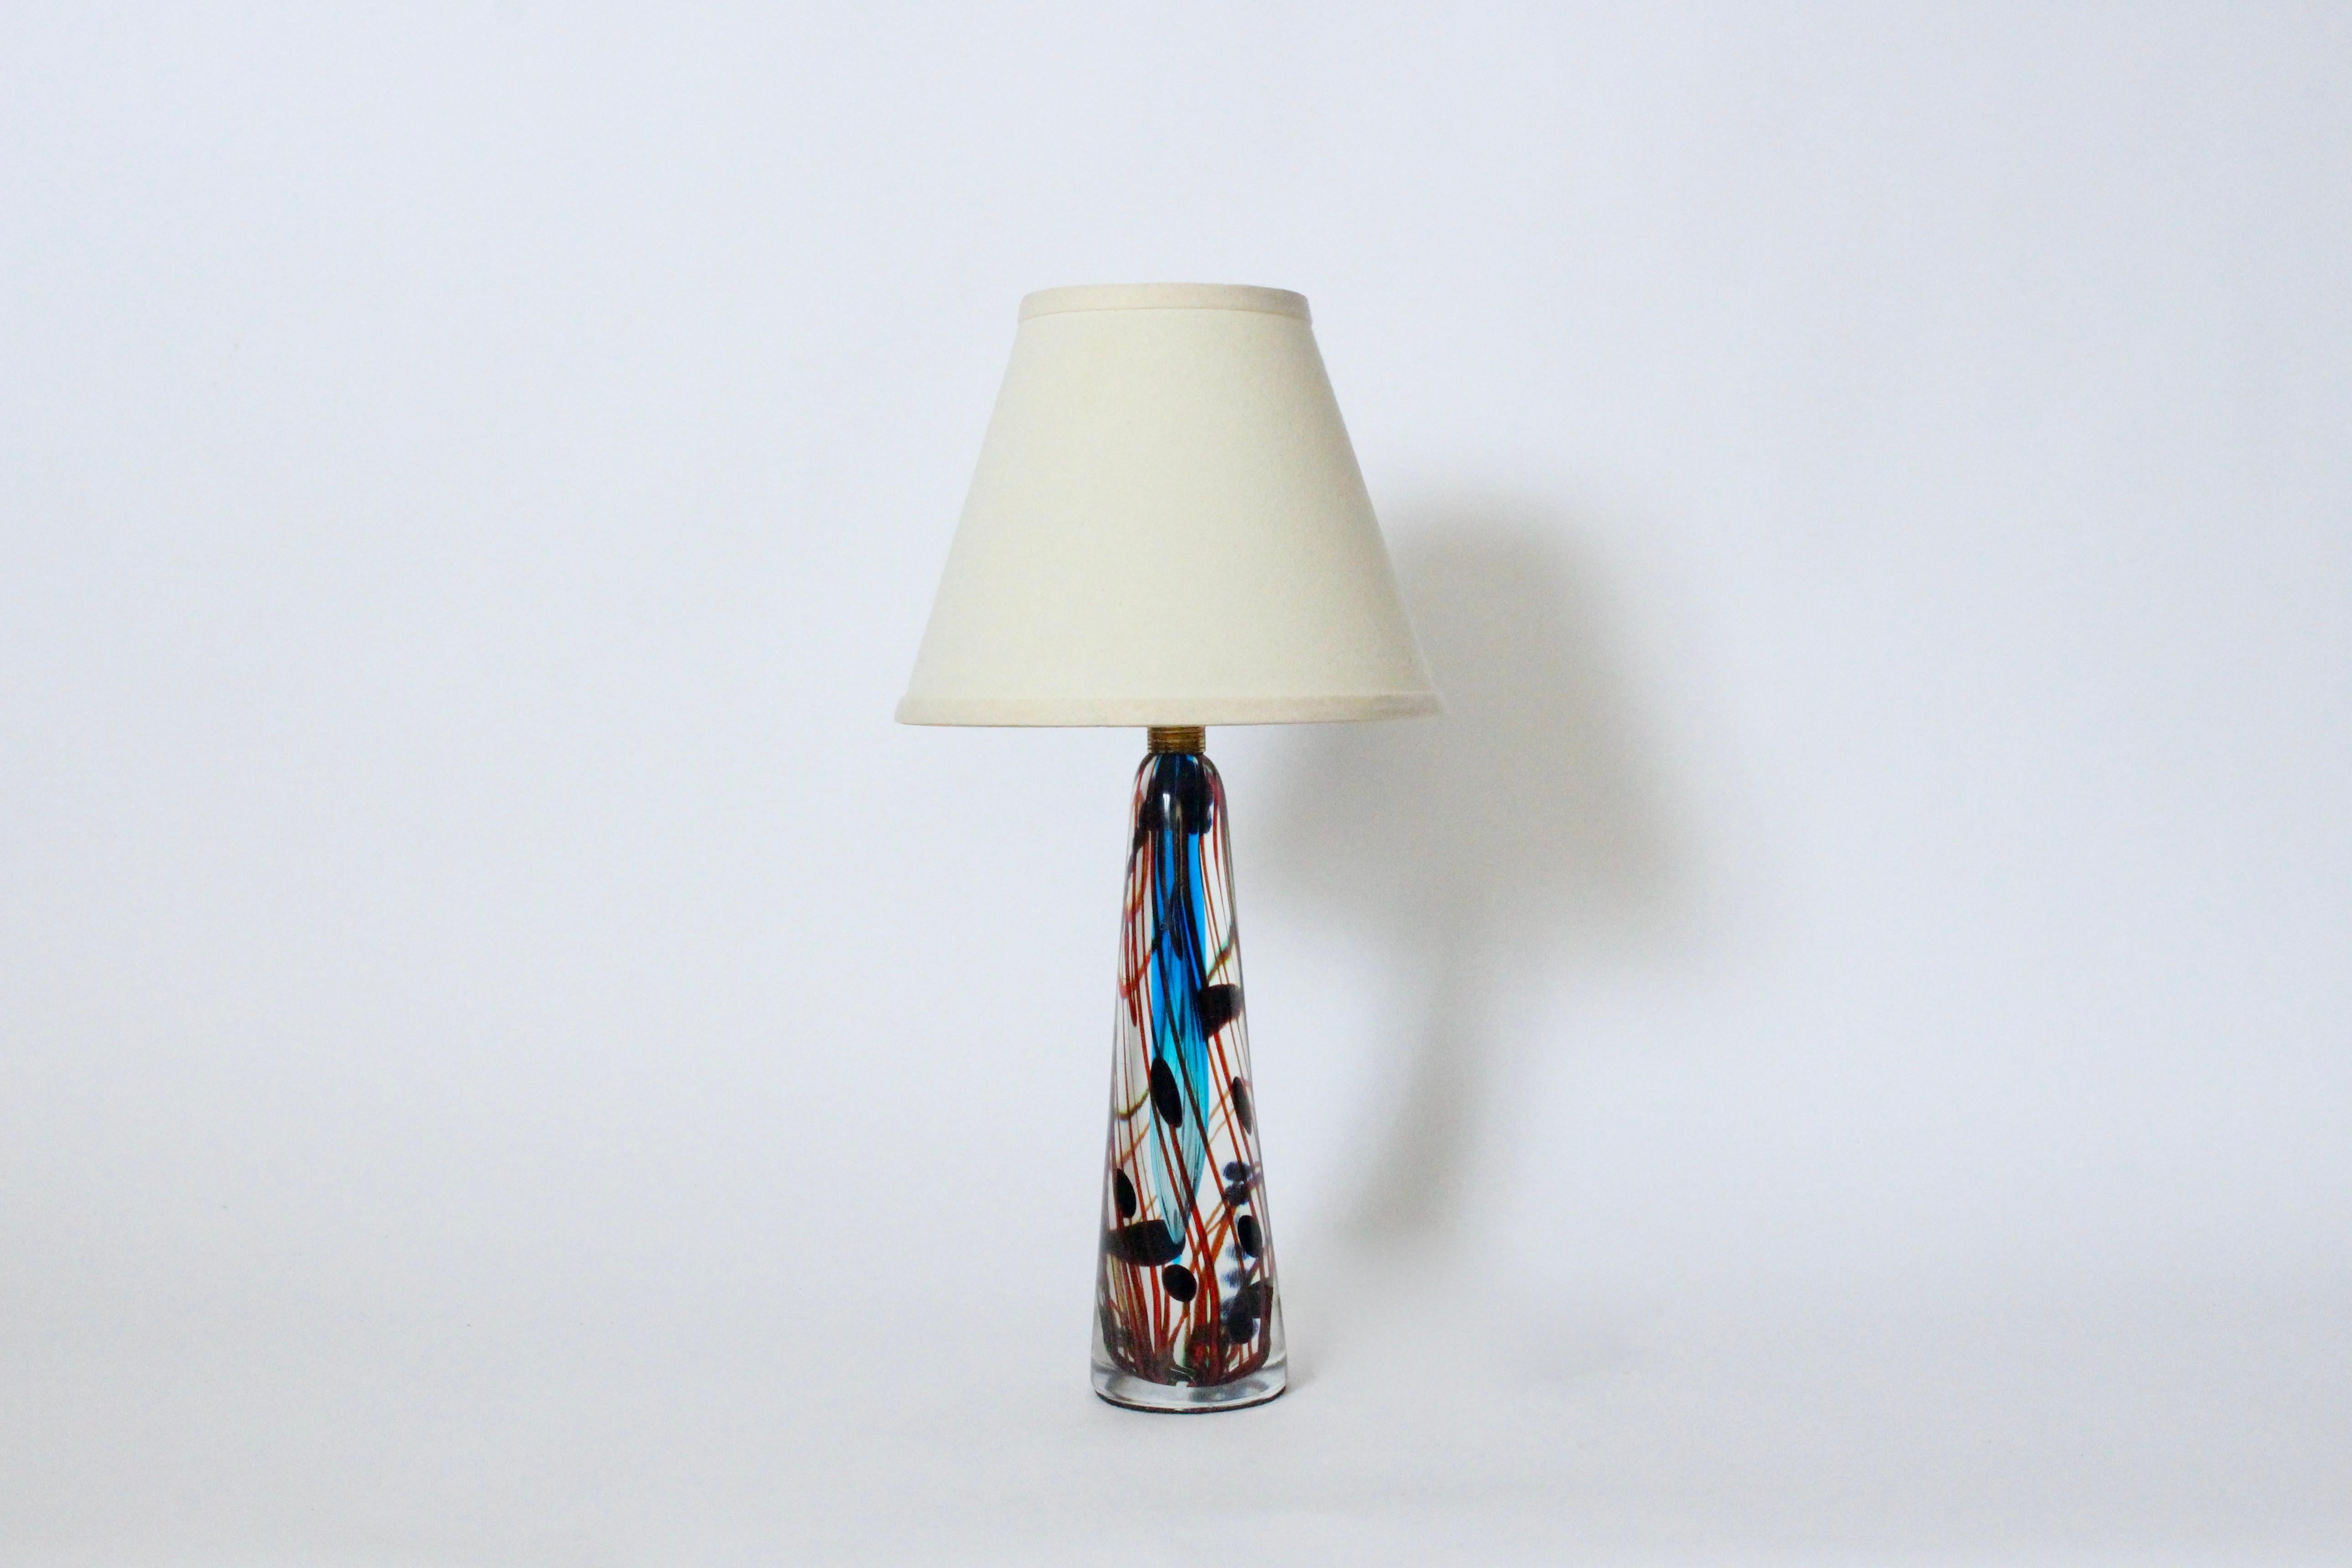 Italian Modern Fulvio Bianconi style hand blown glass table lamp, 1960's. Featuring an elongated transparent cone form and water like movement. Hand crafted with Blue and Aqua coloration including swirling tadpole like Black droplets and Dark Red